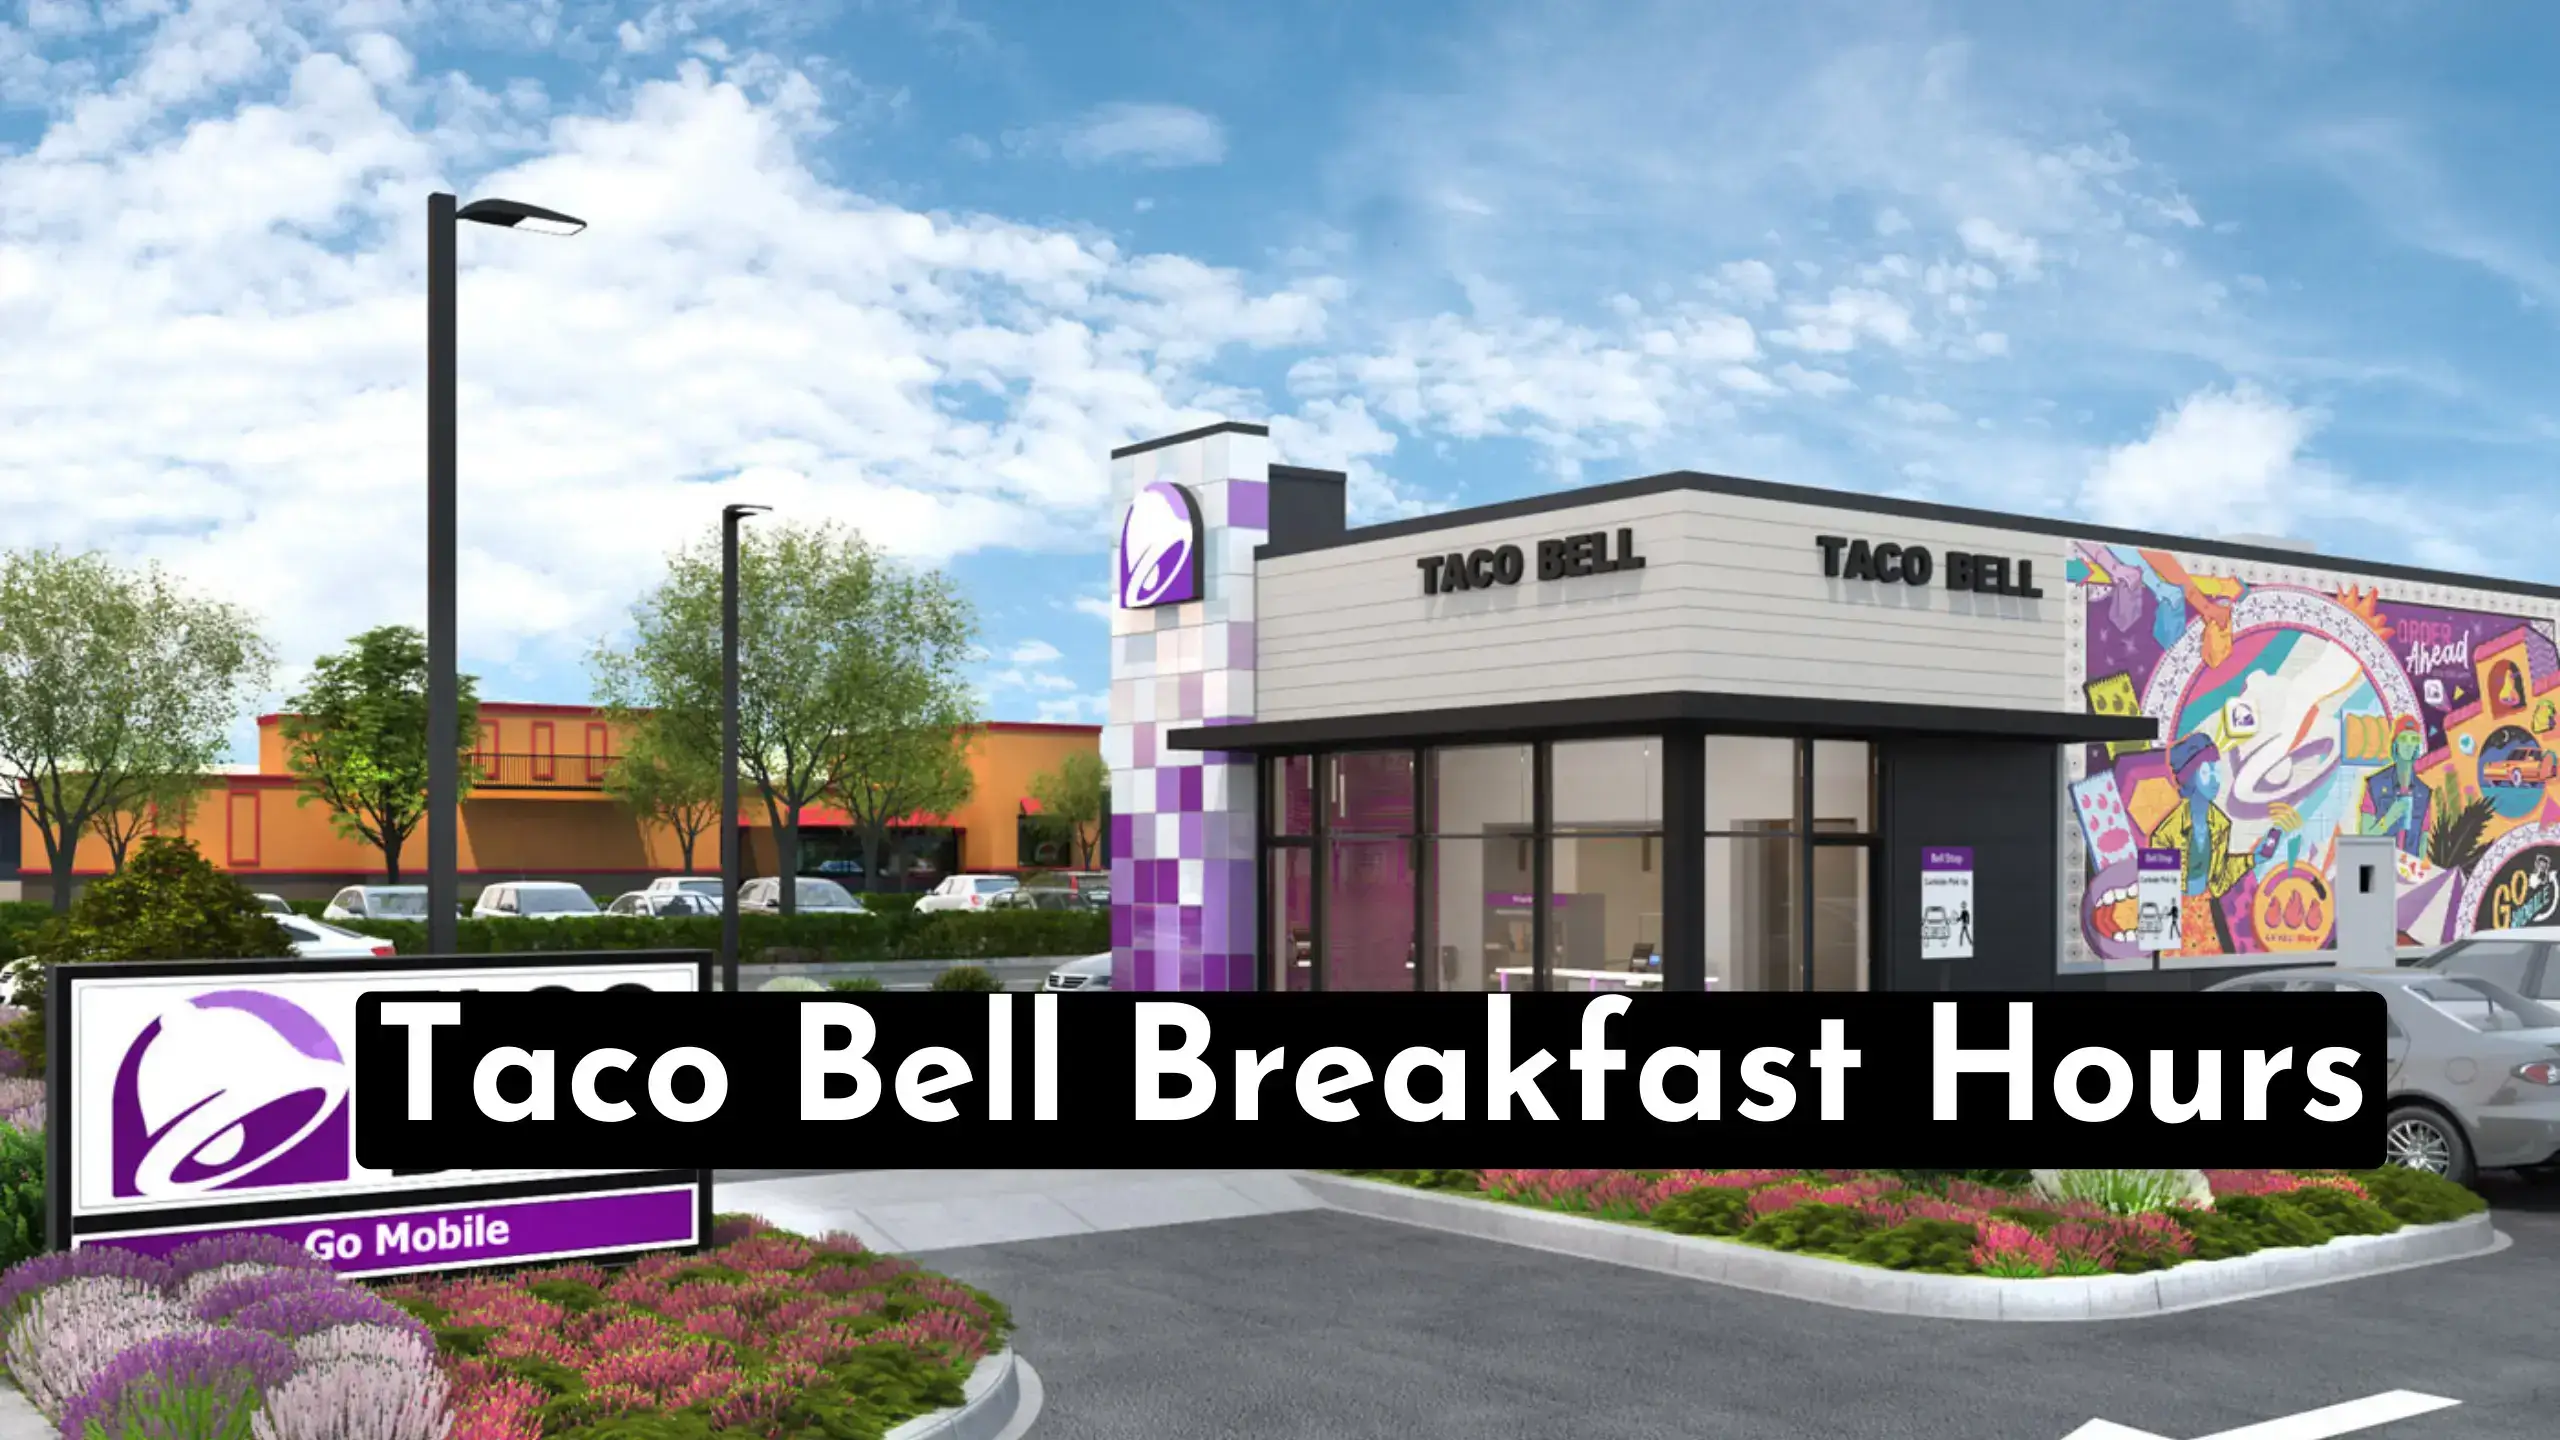 A Quick Guide To Find Taco Bell Breakfast Hours & Timings | Also Quickly Find The Taco Bell Breakfast Menu Options With Important FAQs.